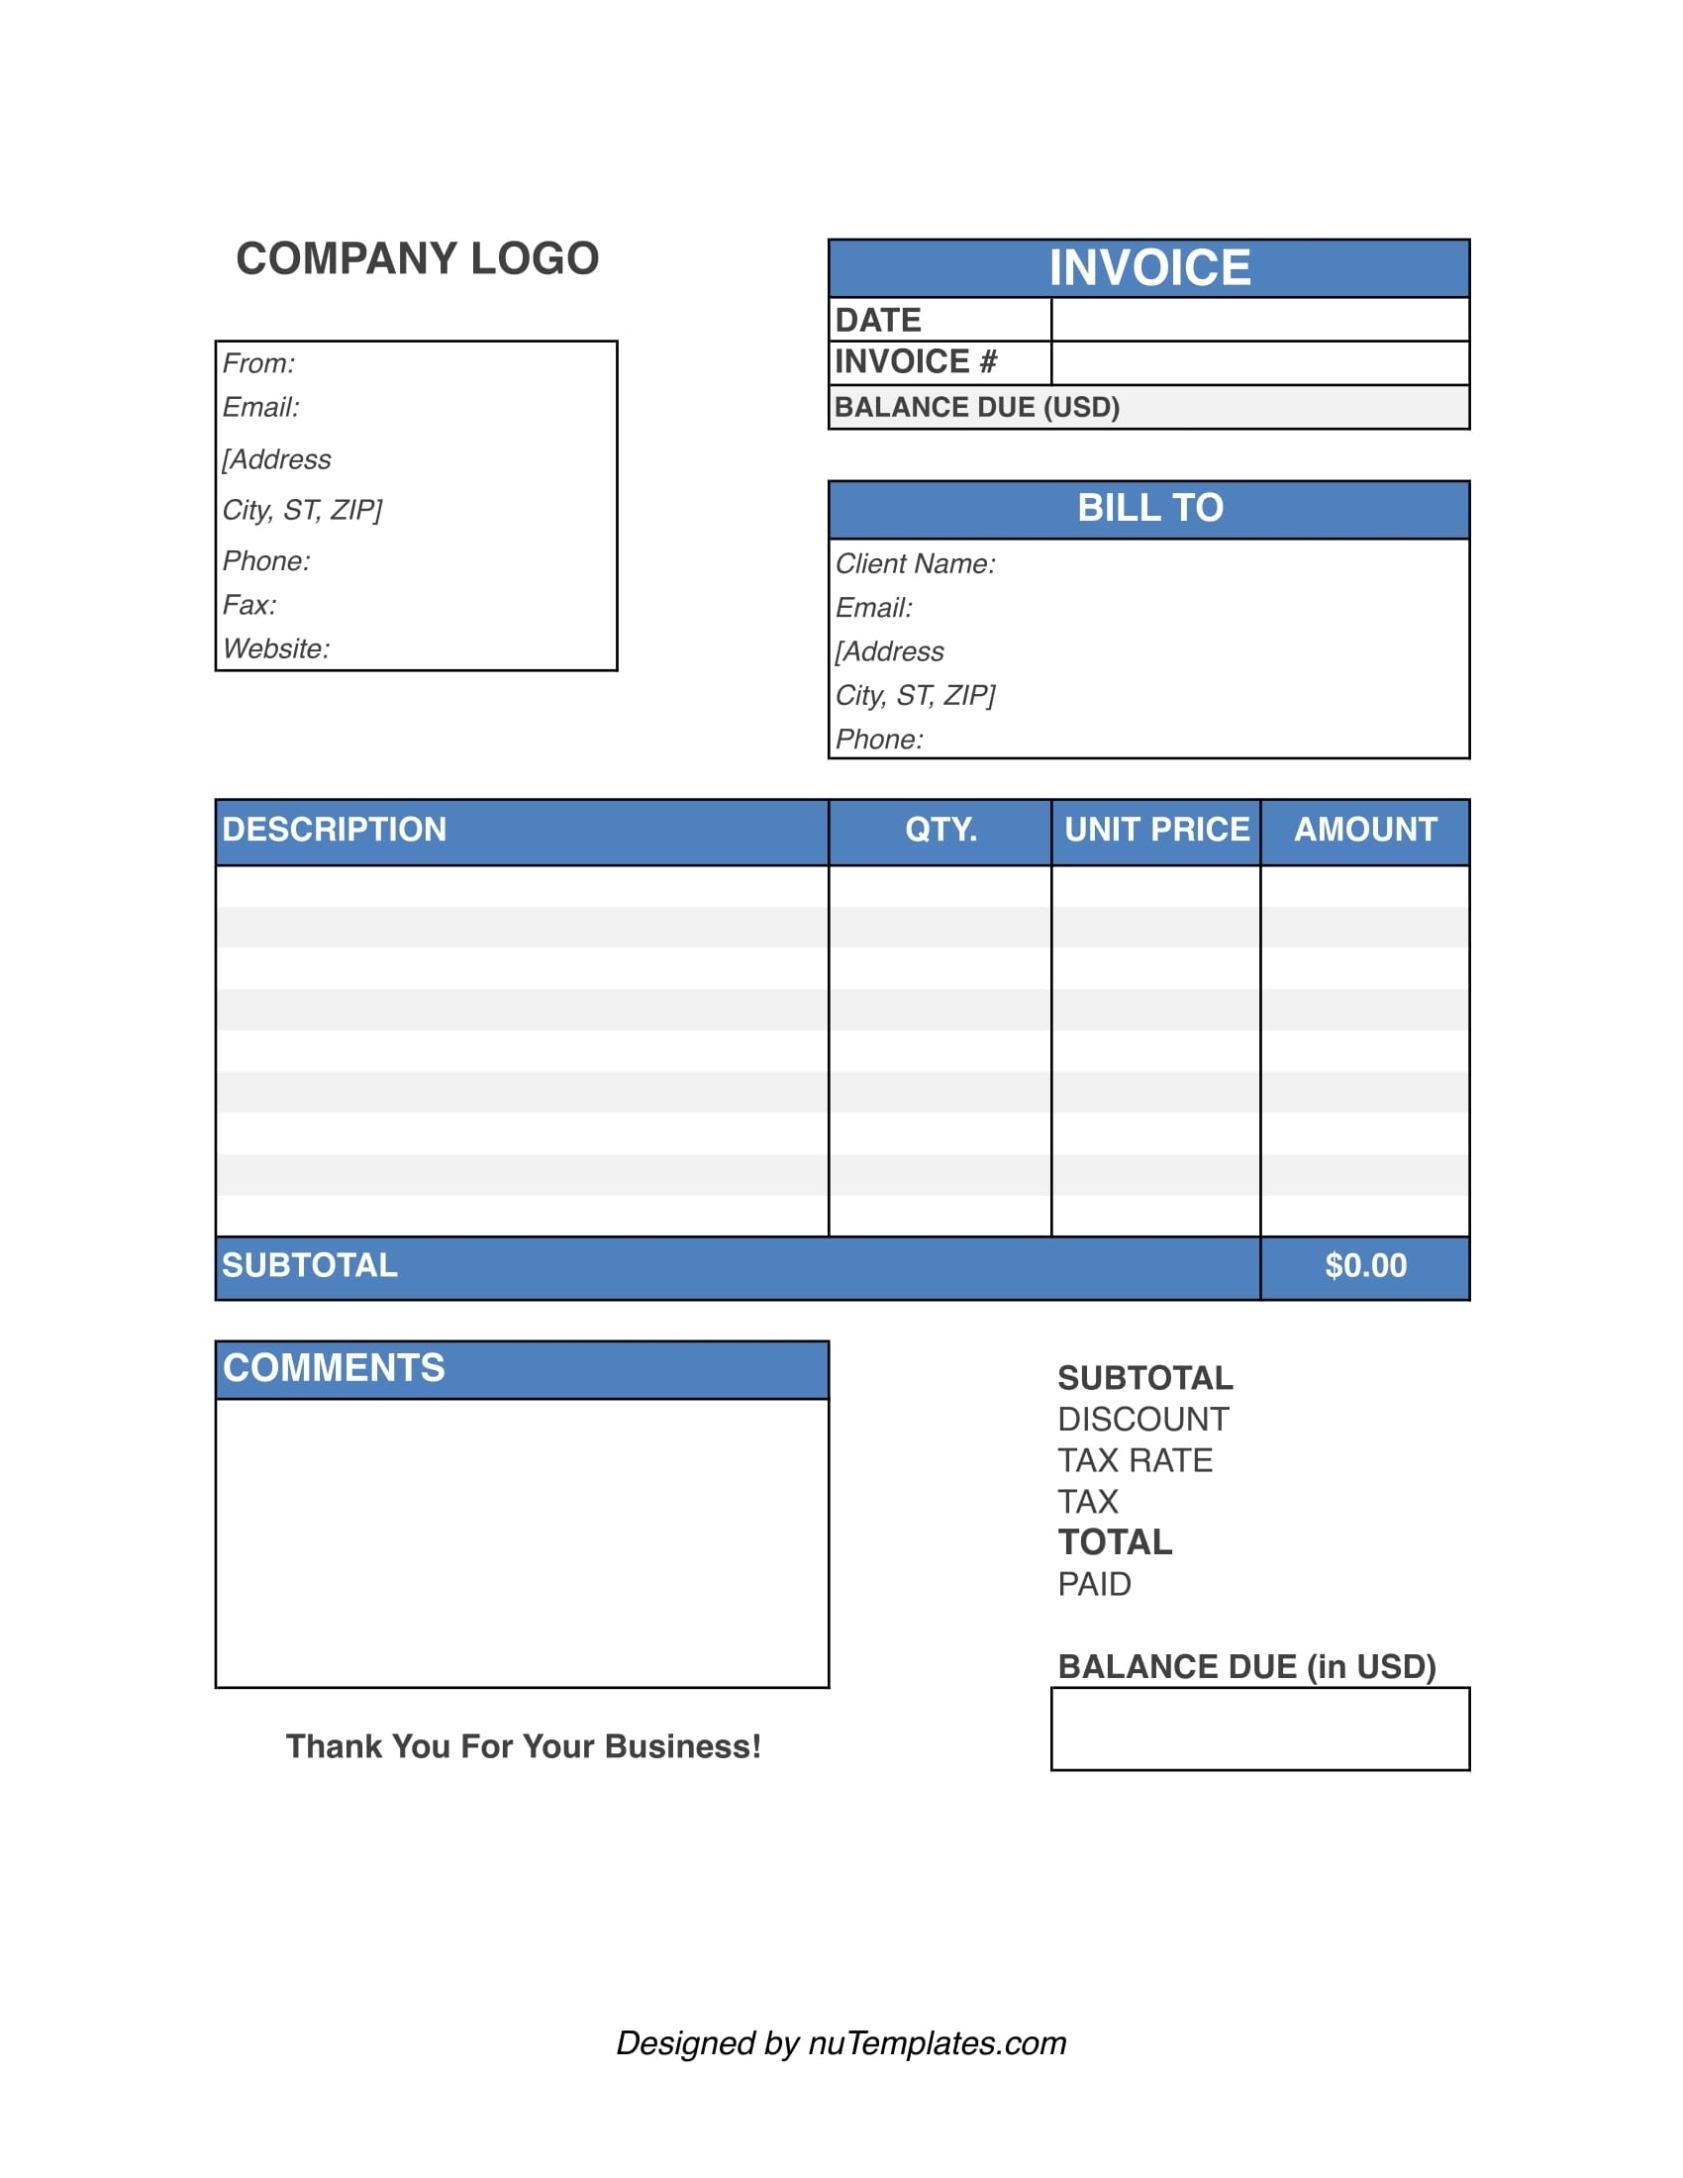 Cleaning Invoice Template - Cleaning Invoices | Nutemplates With Invoice Template For Work Done